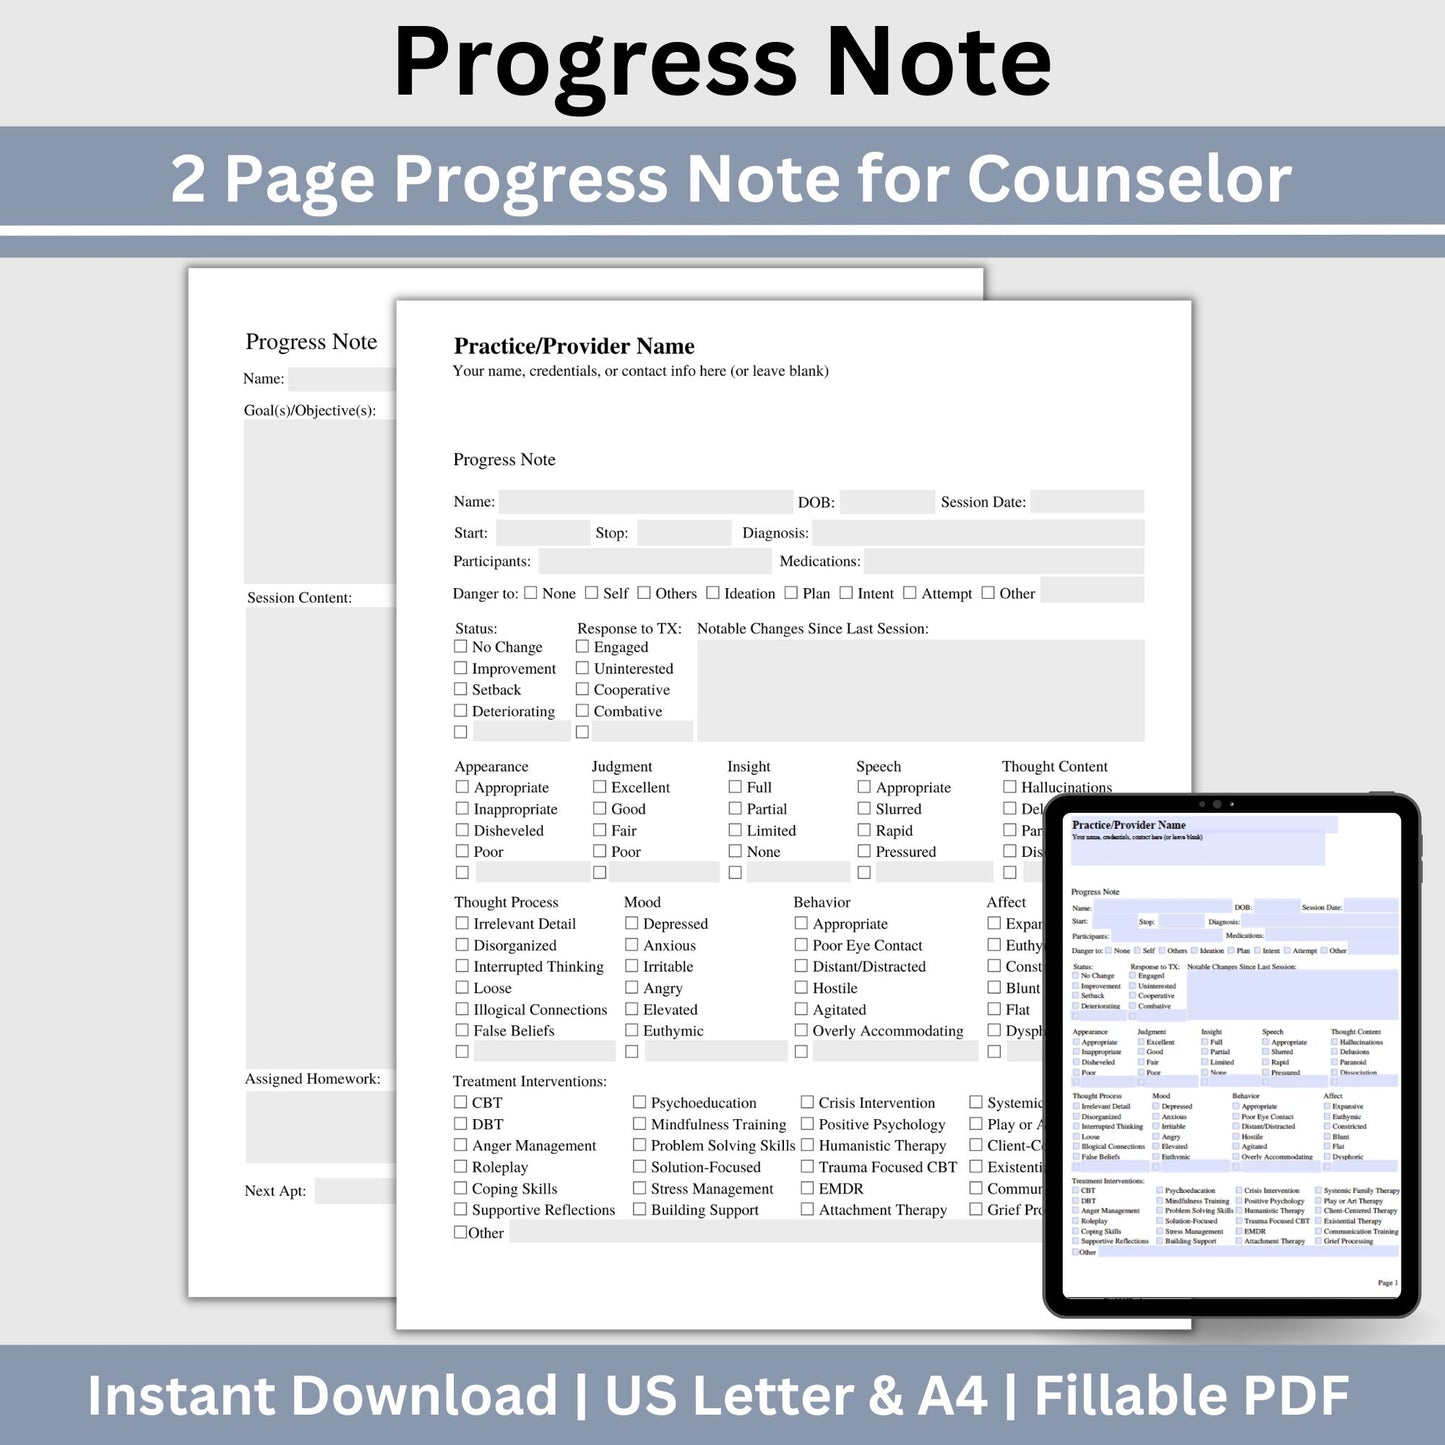 Therapy progress notes template designed specially for Mental Health Counselors and Therapists. Elevate your counseling office documentation with this user-friendly therapist template